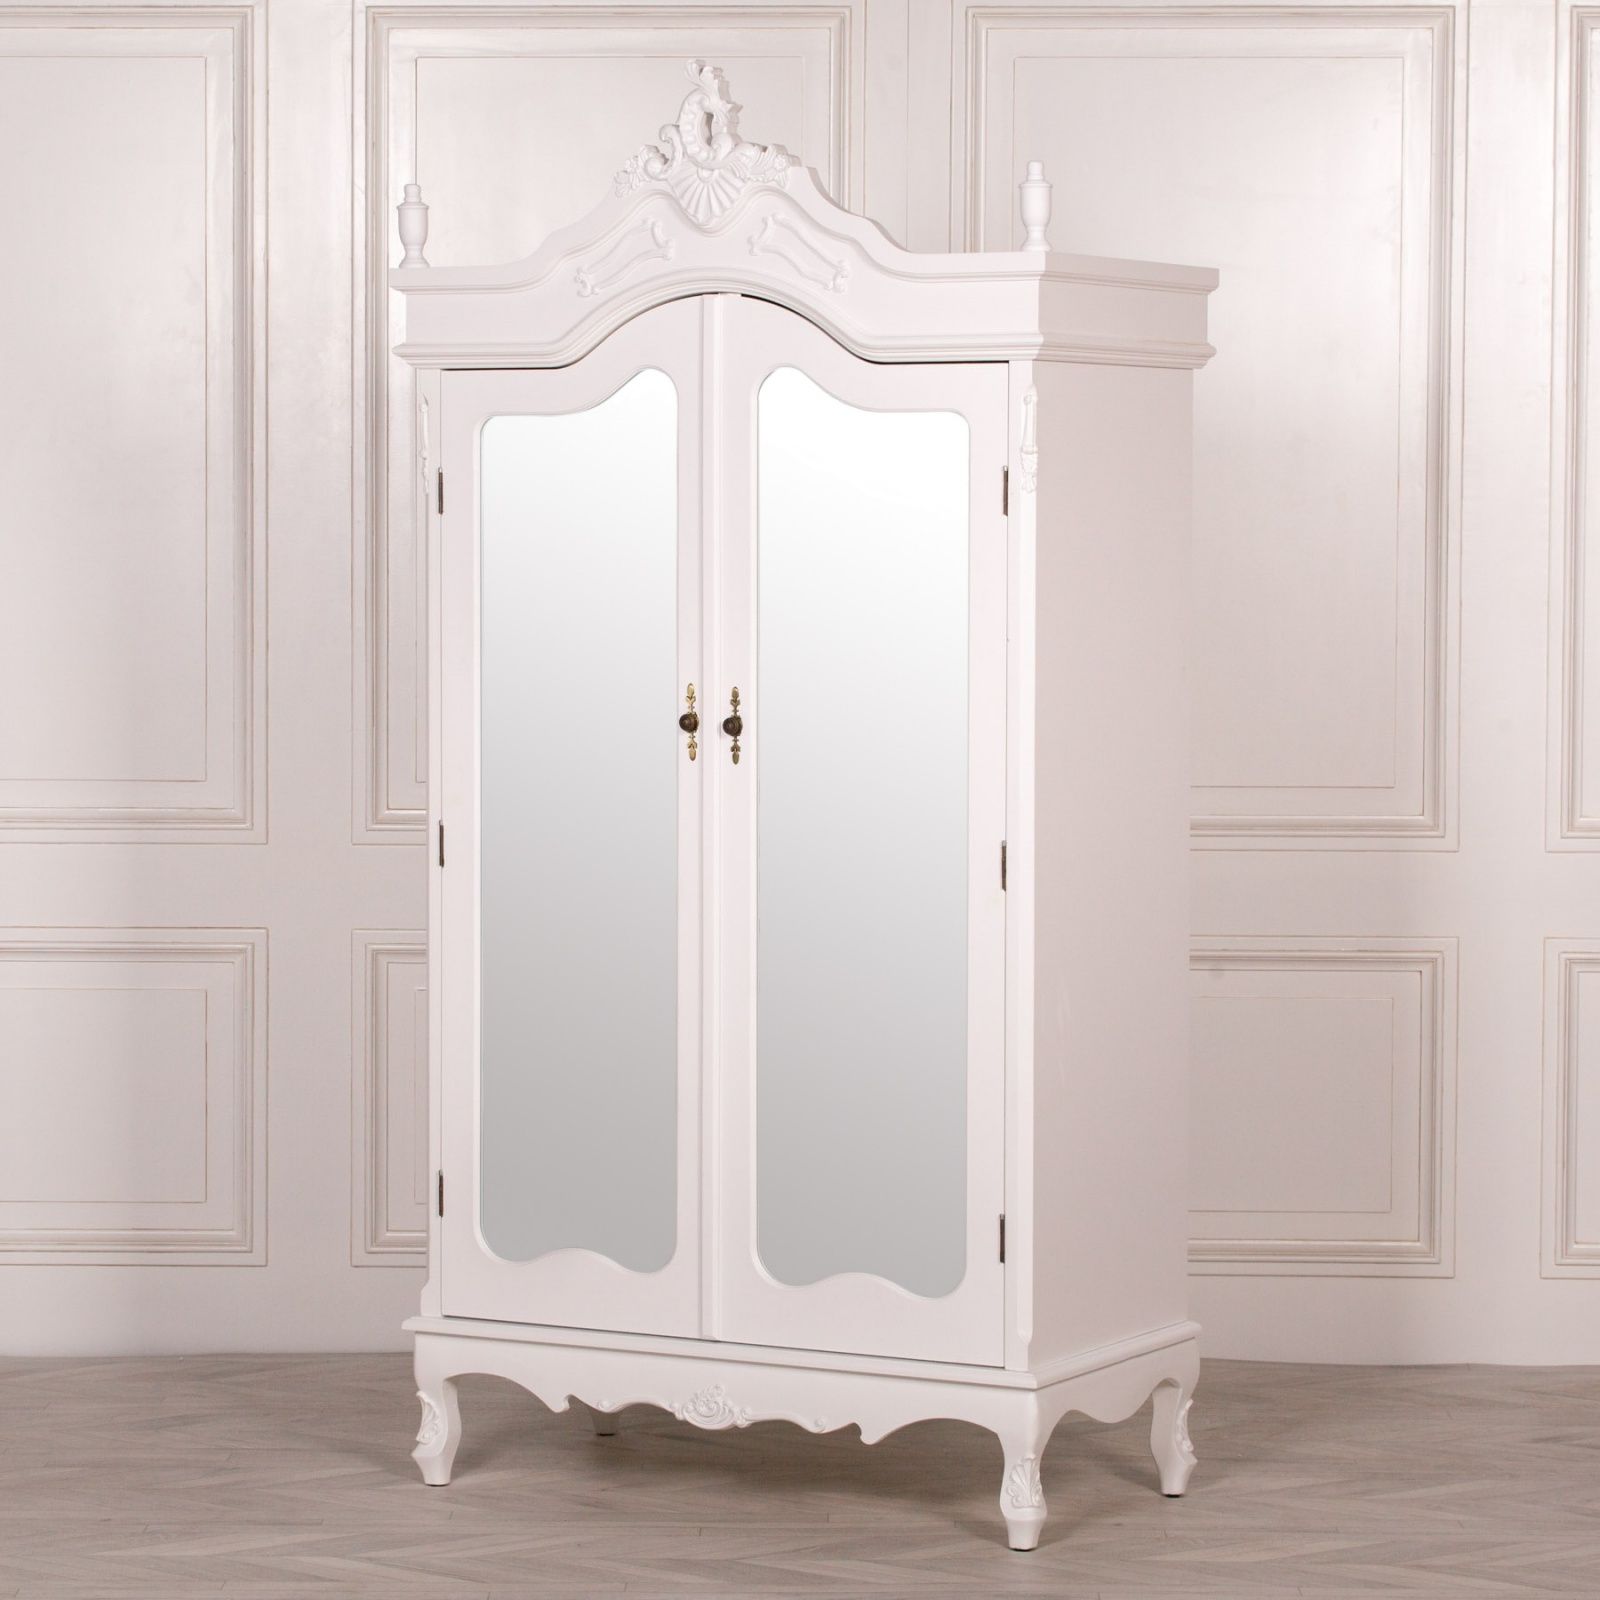 French Style Wardrobe White Mirrored Double Armoire Pertaining To French Wardrobes (View 5 of 20)